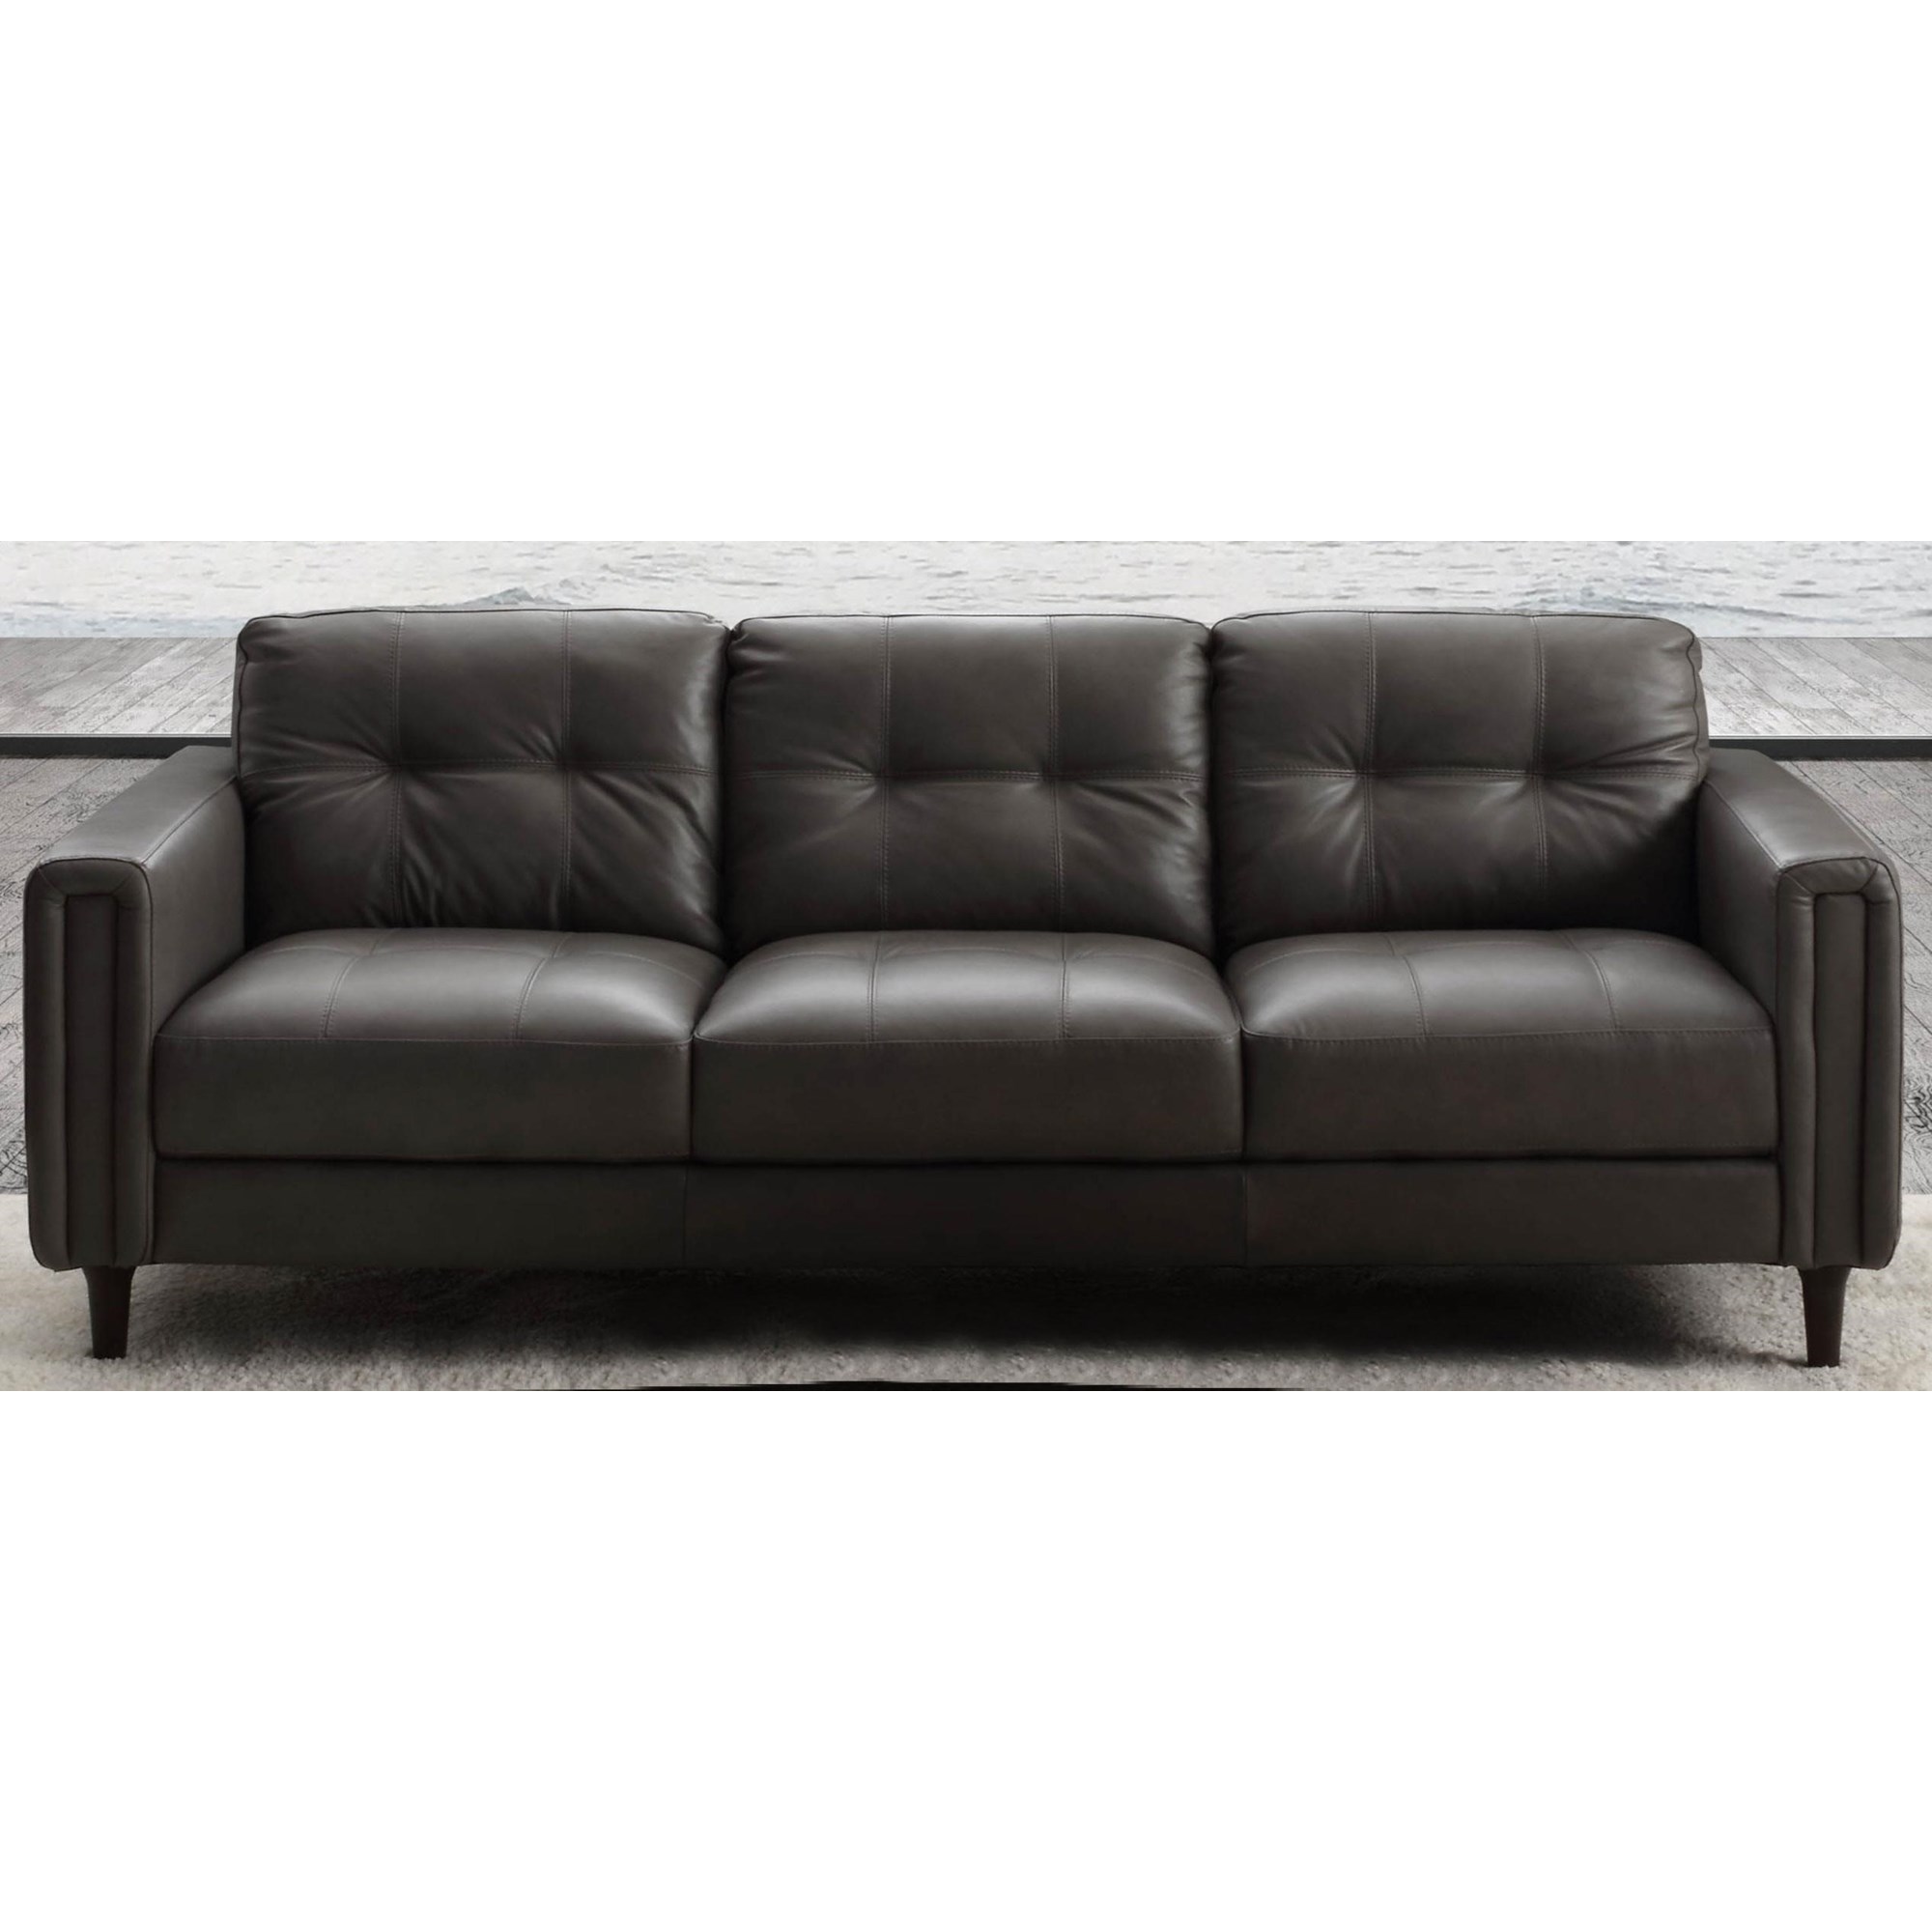 Chateau D'Ax C965 400166092 Leather Sofa in Argento | Baer's Furniture ...